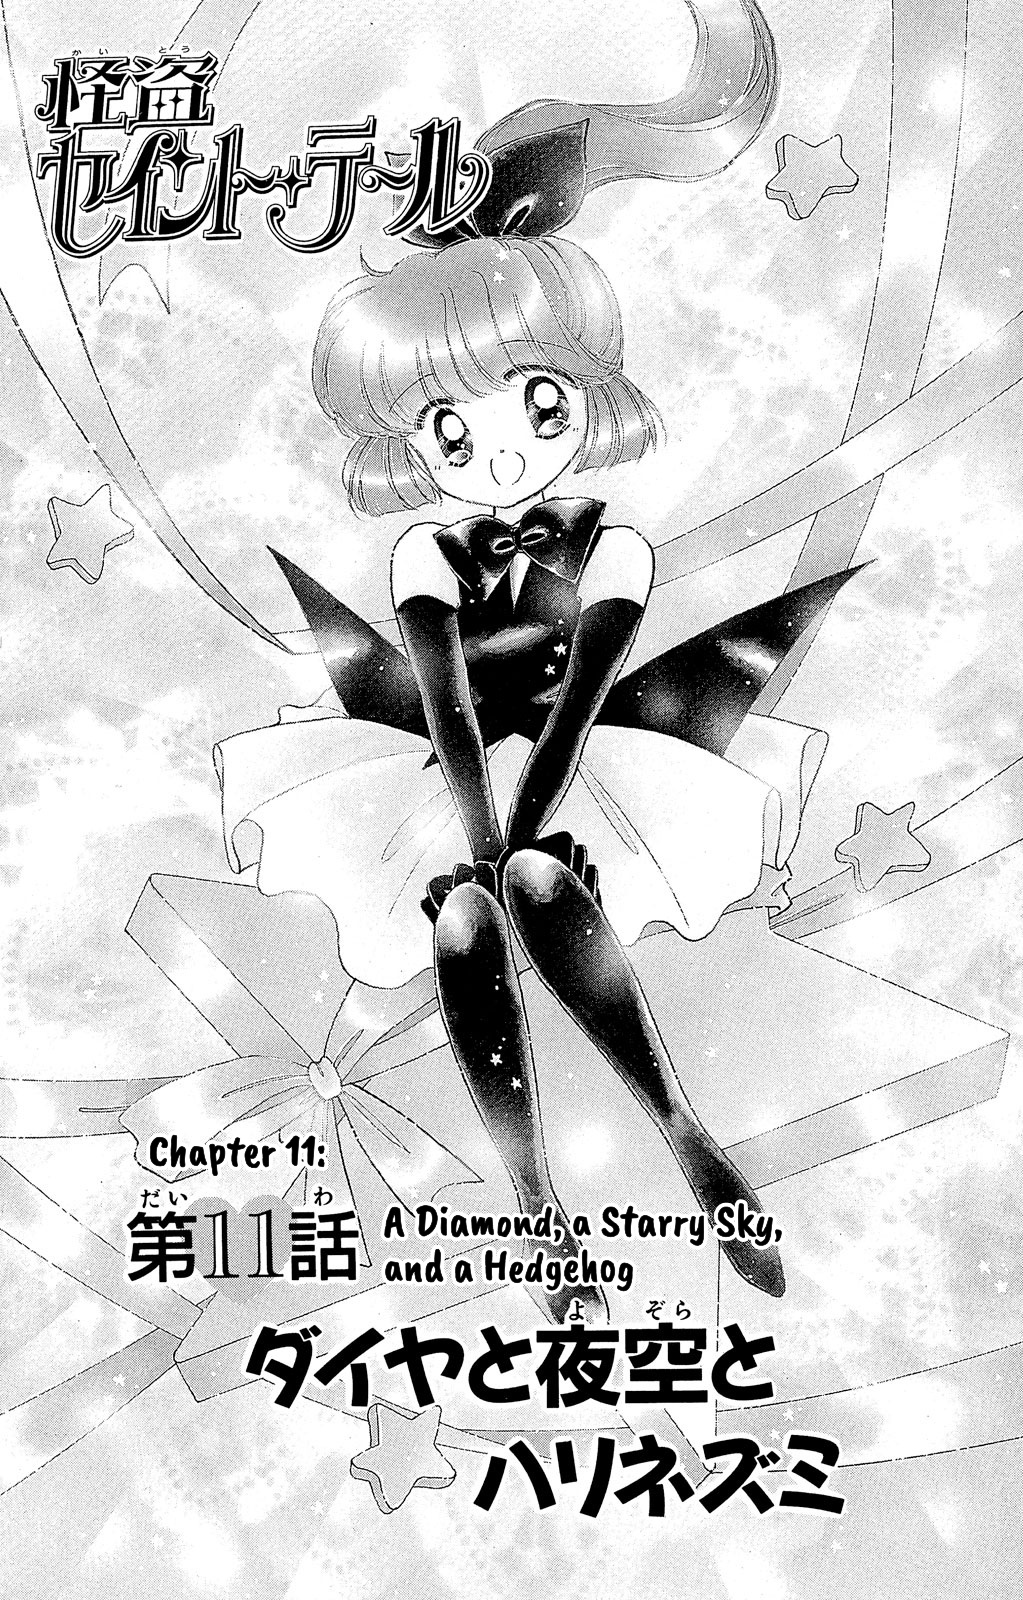 Kaitou Saint Tail Vol.3 Chapter 11: A Diamond, A Starry Sky, And A Hedgehog - Picture 2